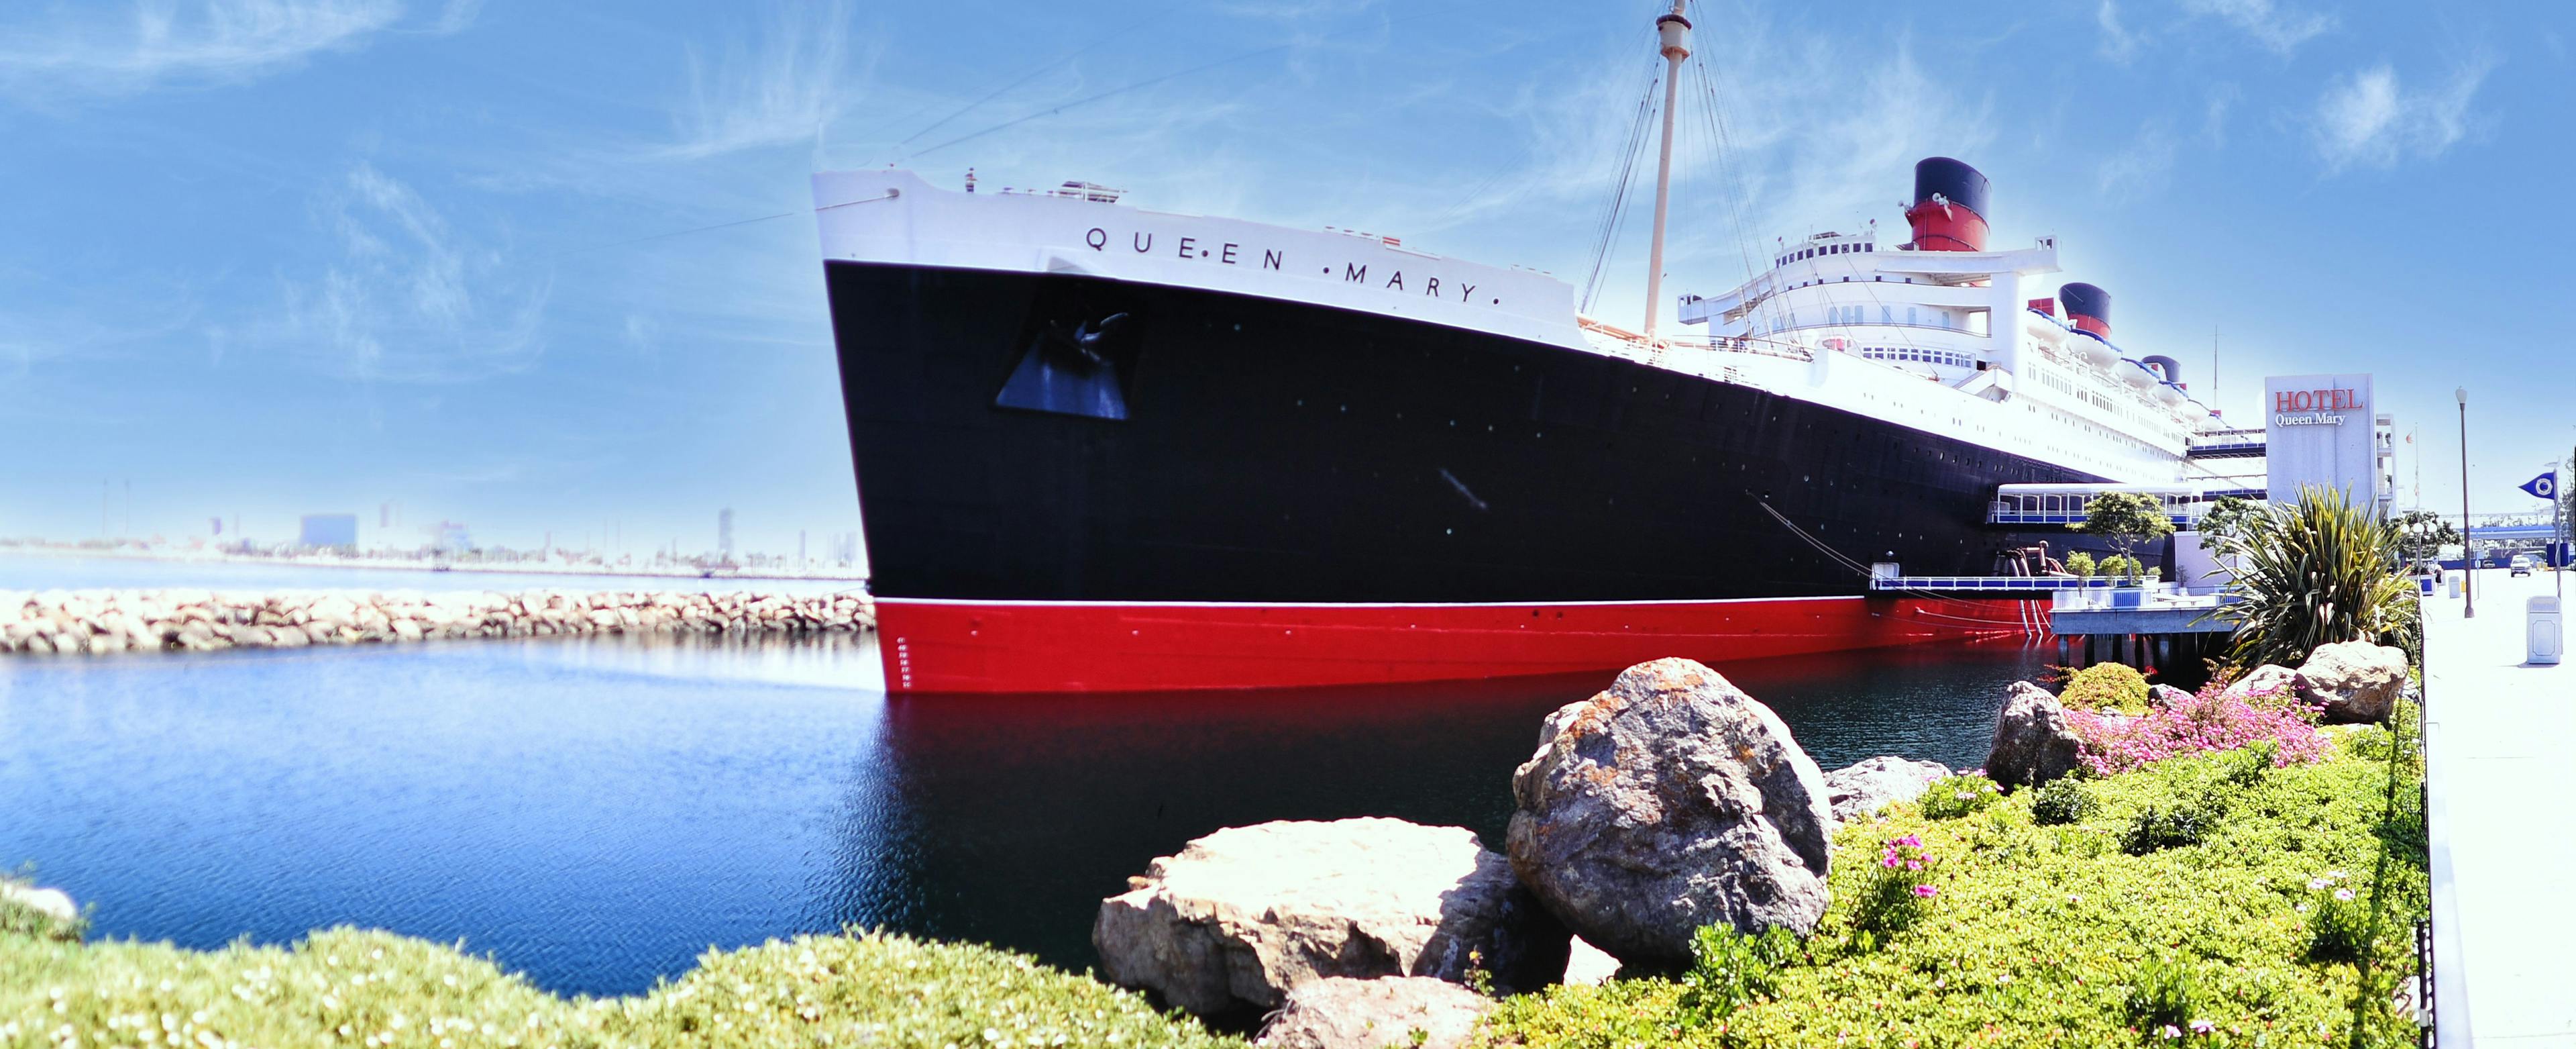 On board the Queen Mary, visitors can dine, take a tour, or book a room for an overnight stay. (stock.adobe.com)